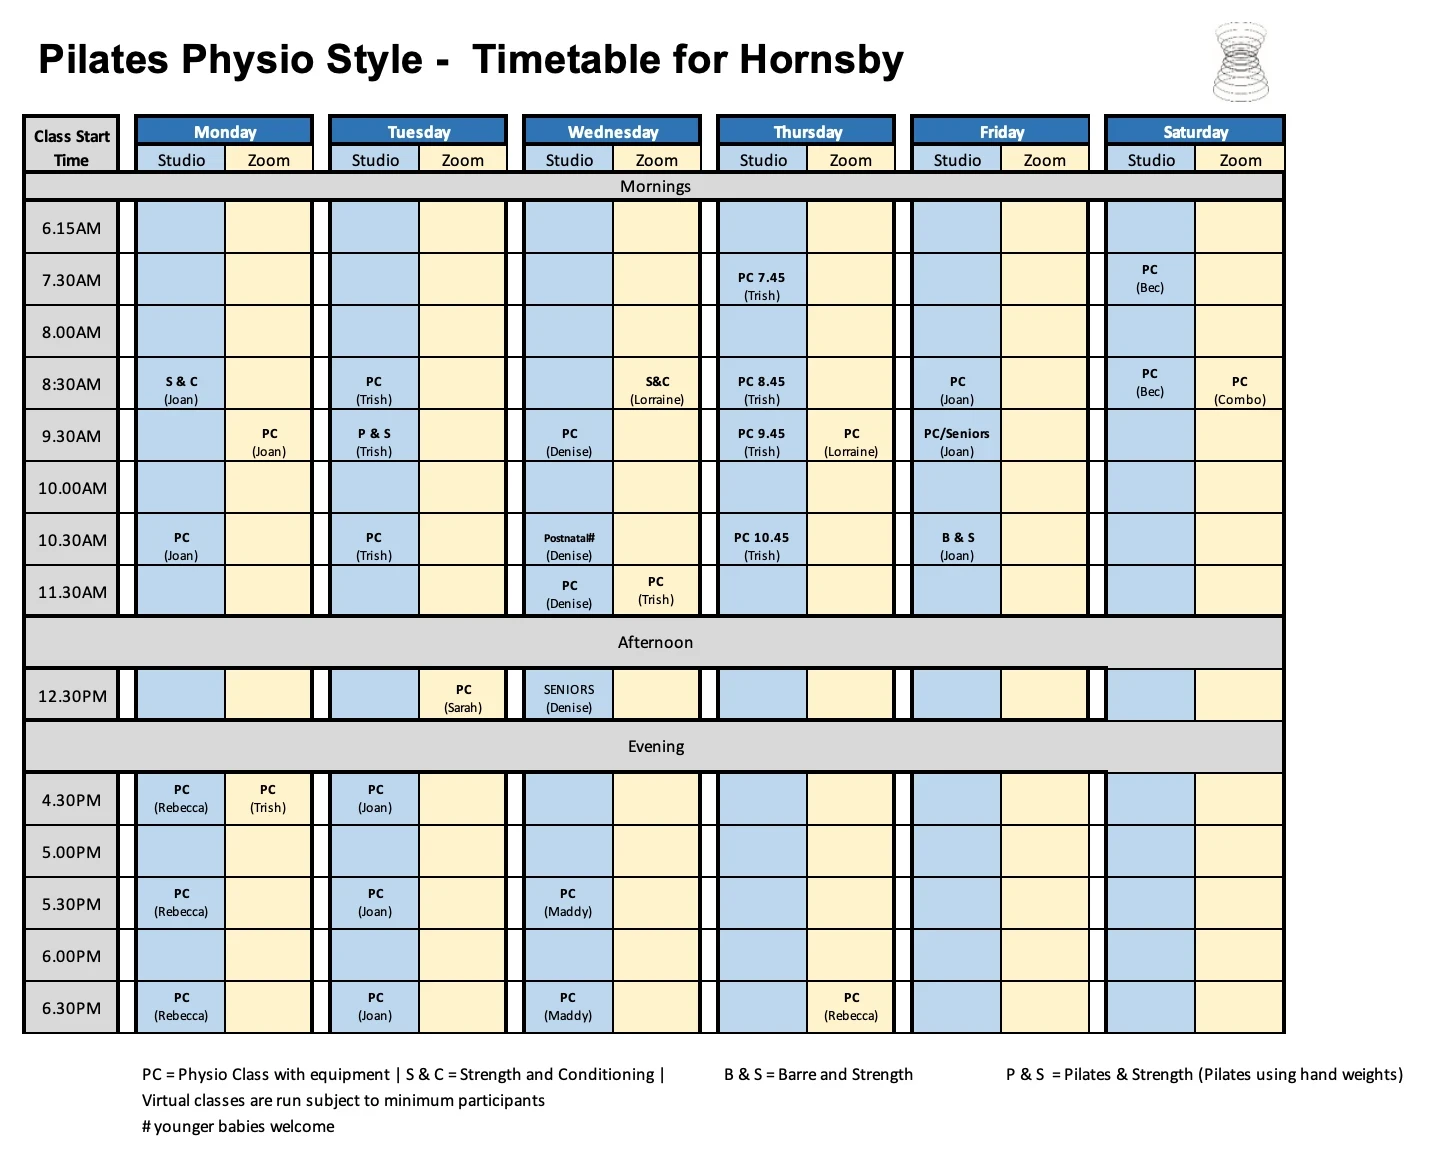 Pilates Physio Style Hornsby timetable